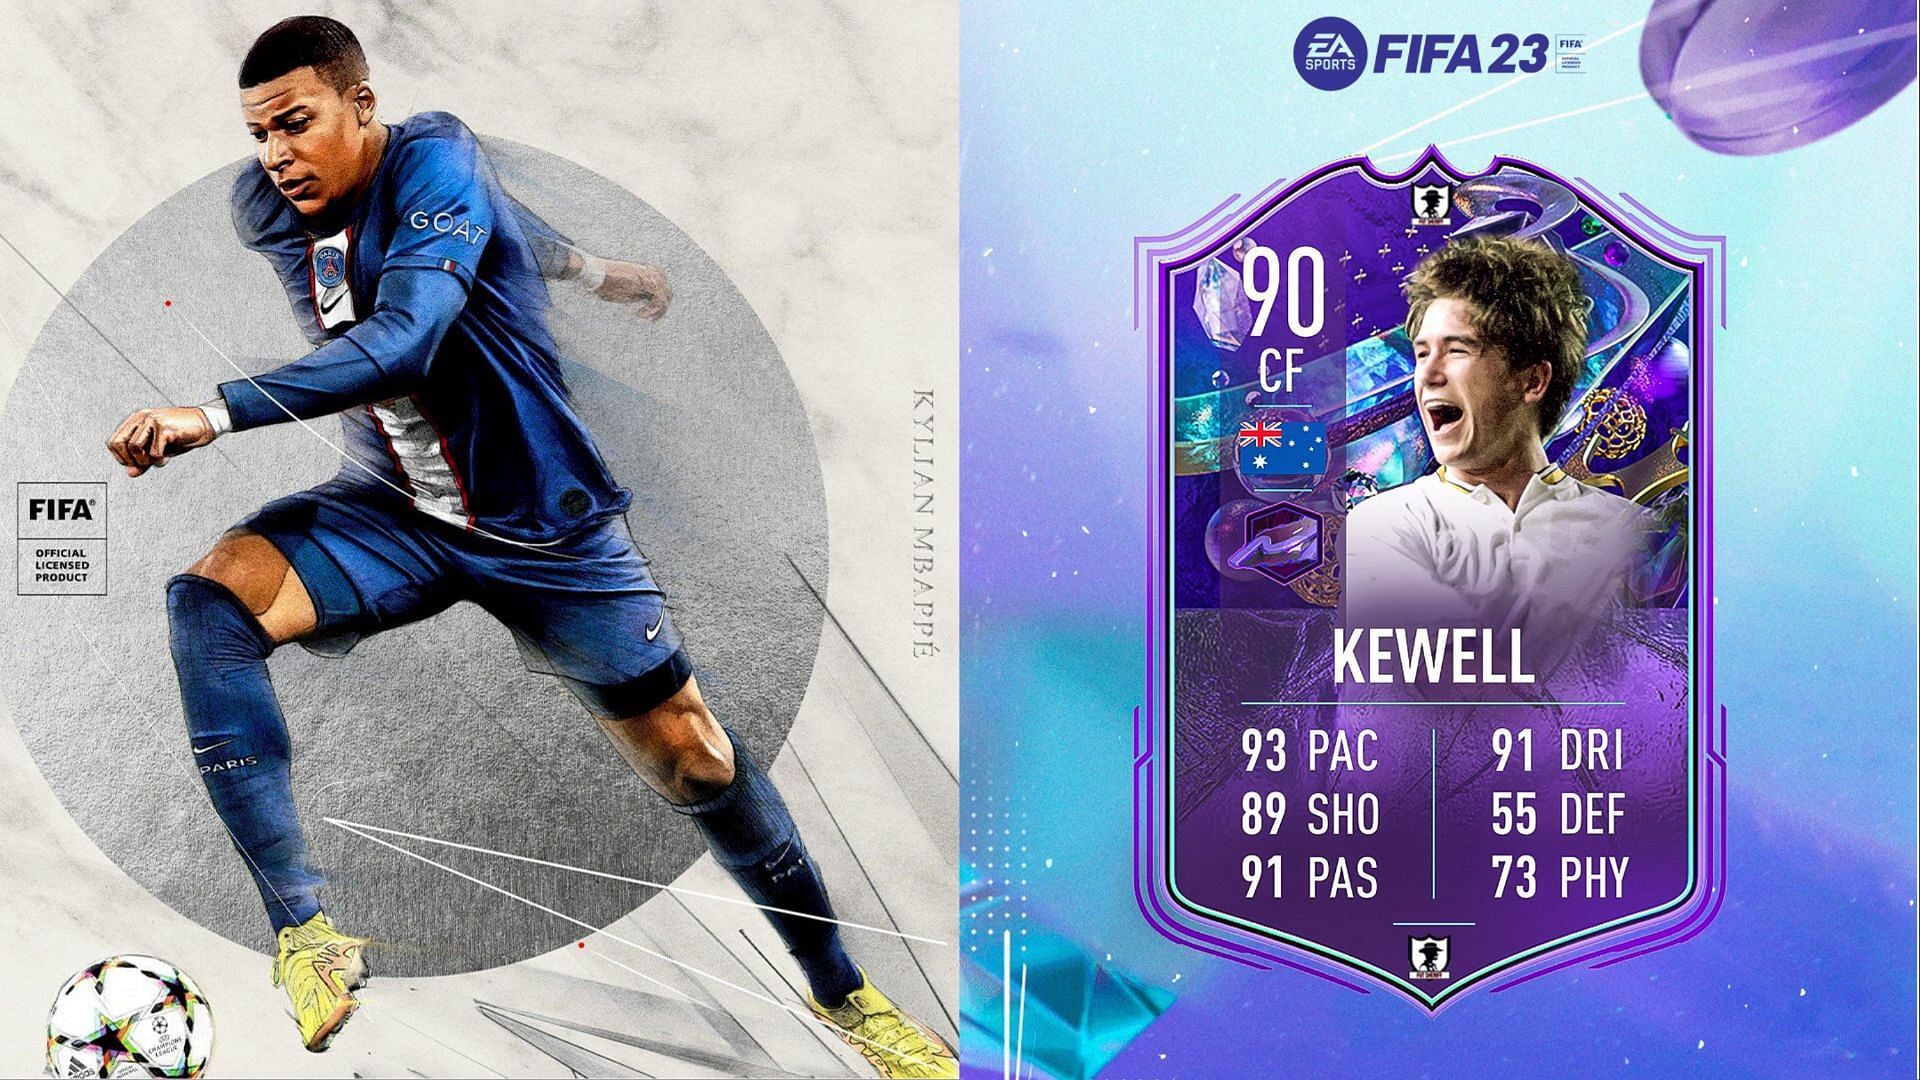 Harry Kewell&rsquo;s rumored Fantasy FUT card in FIFA 23 could have some really strong stats (Images via EA Sports, Twitter/FUT Sheriff)